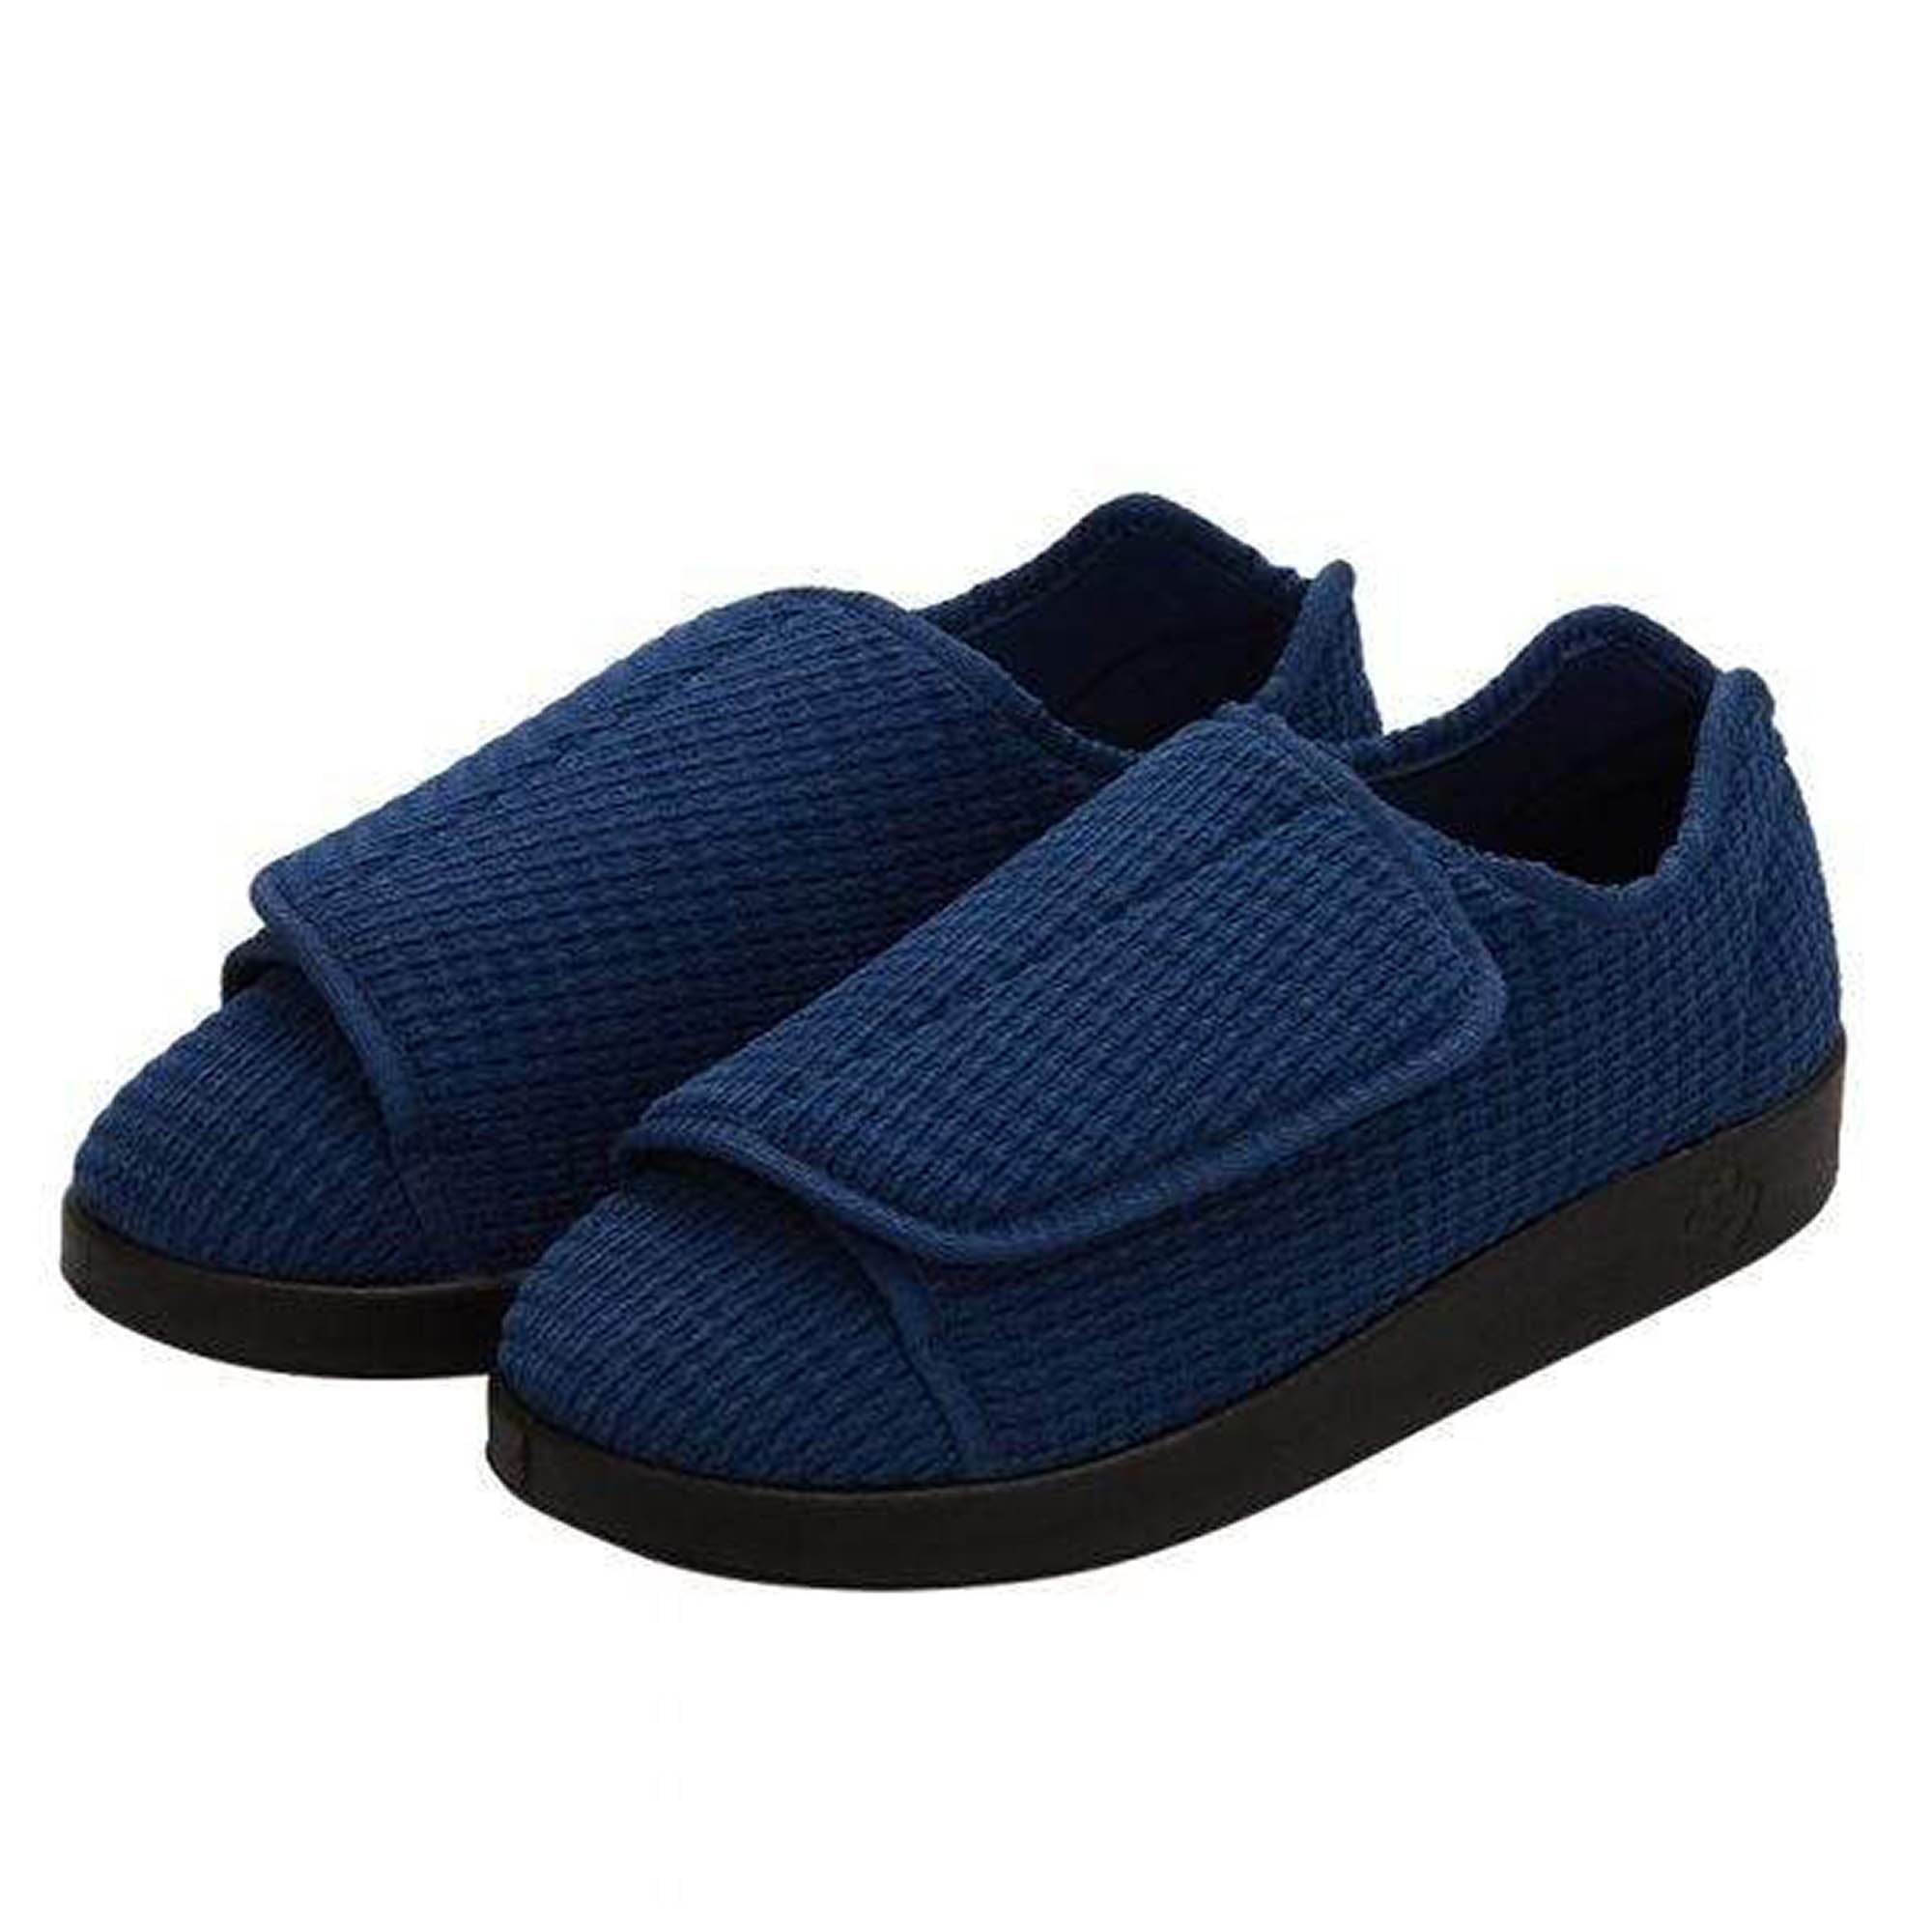 Silverts Men's Extra Extra Wide Slip-Resistant Slippers - Black - 12